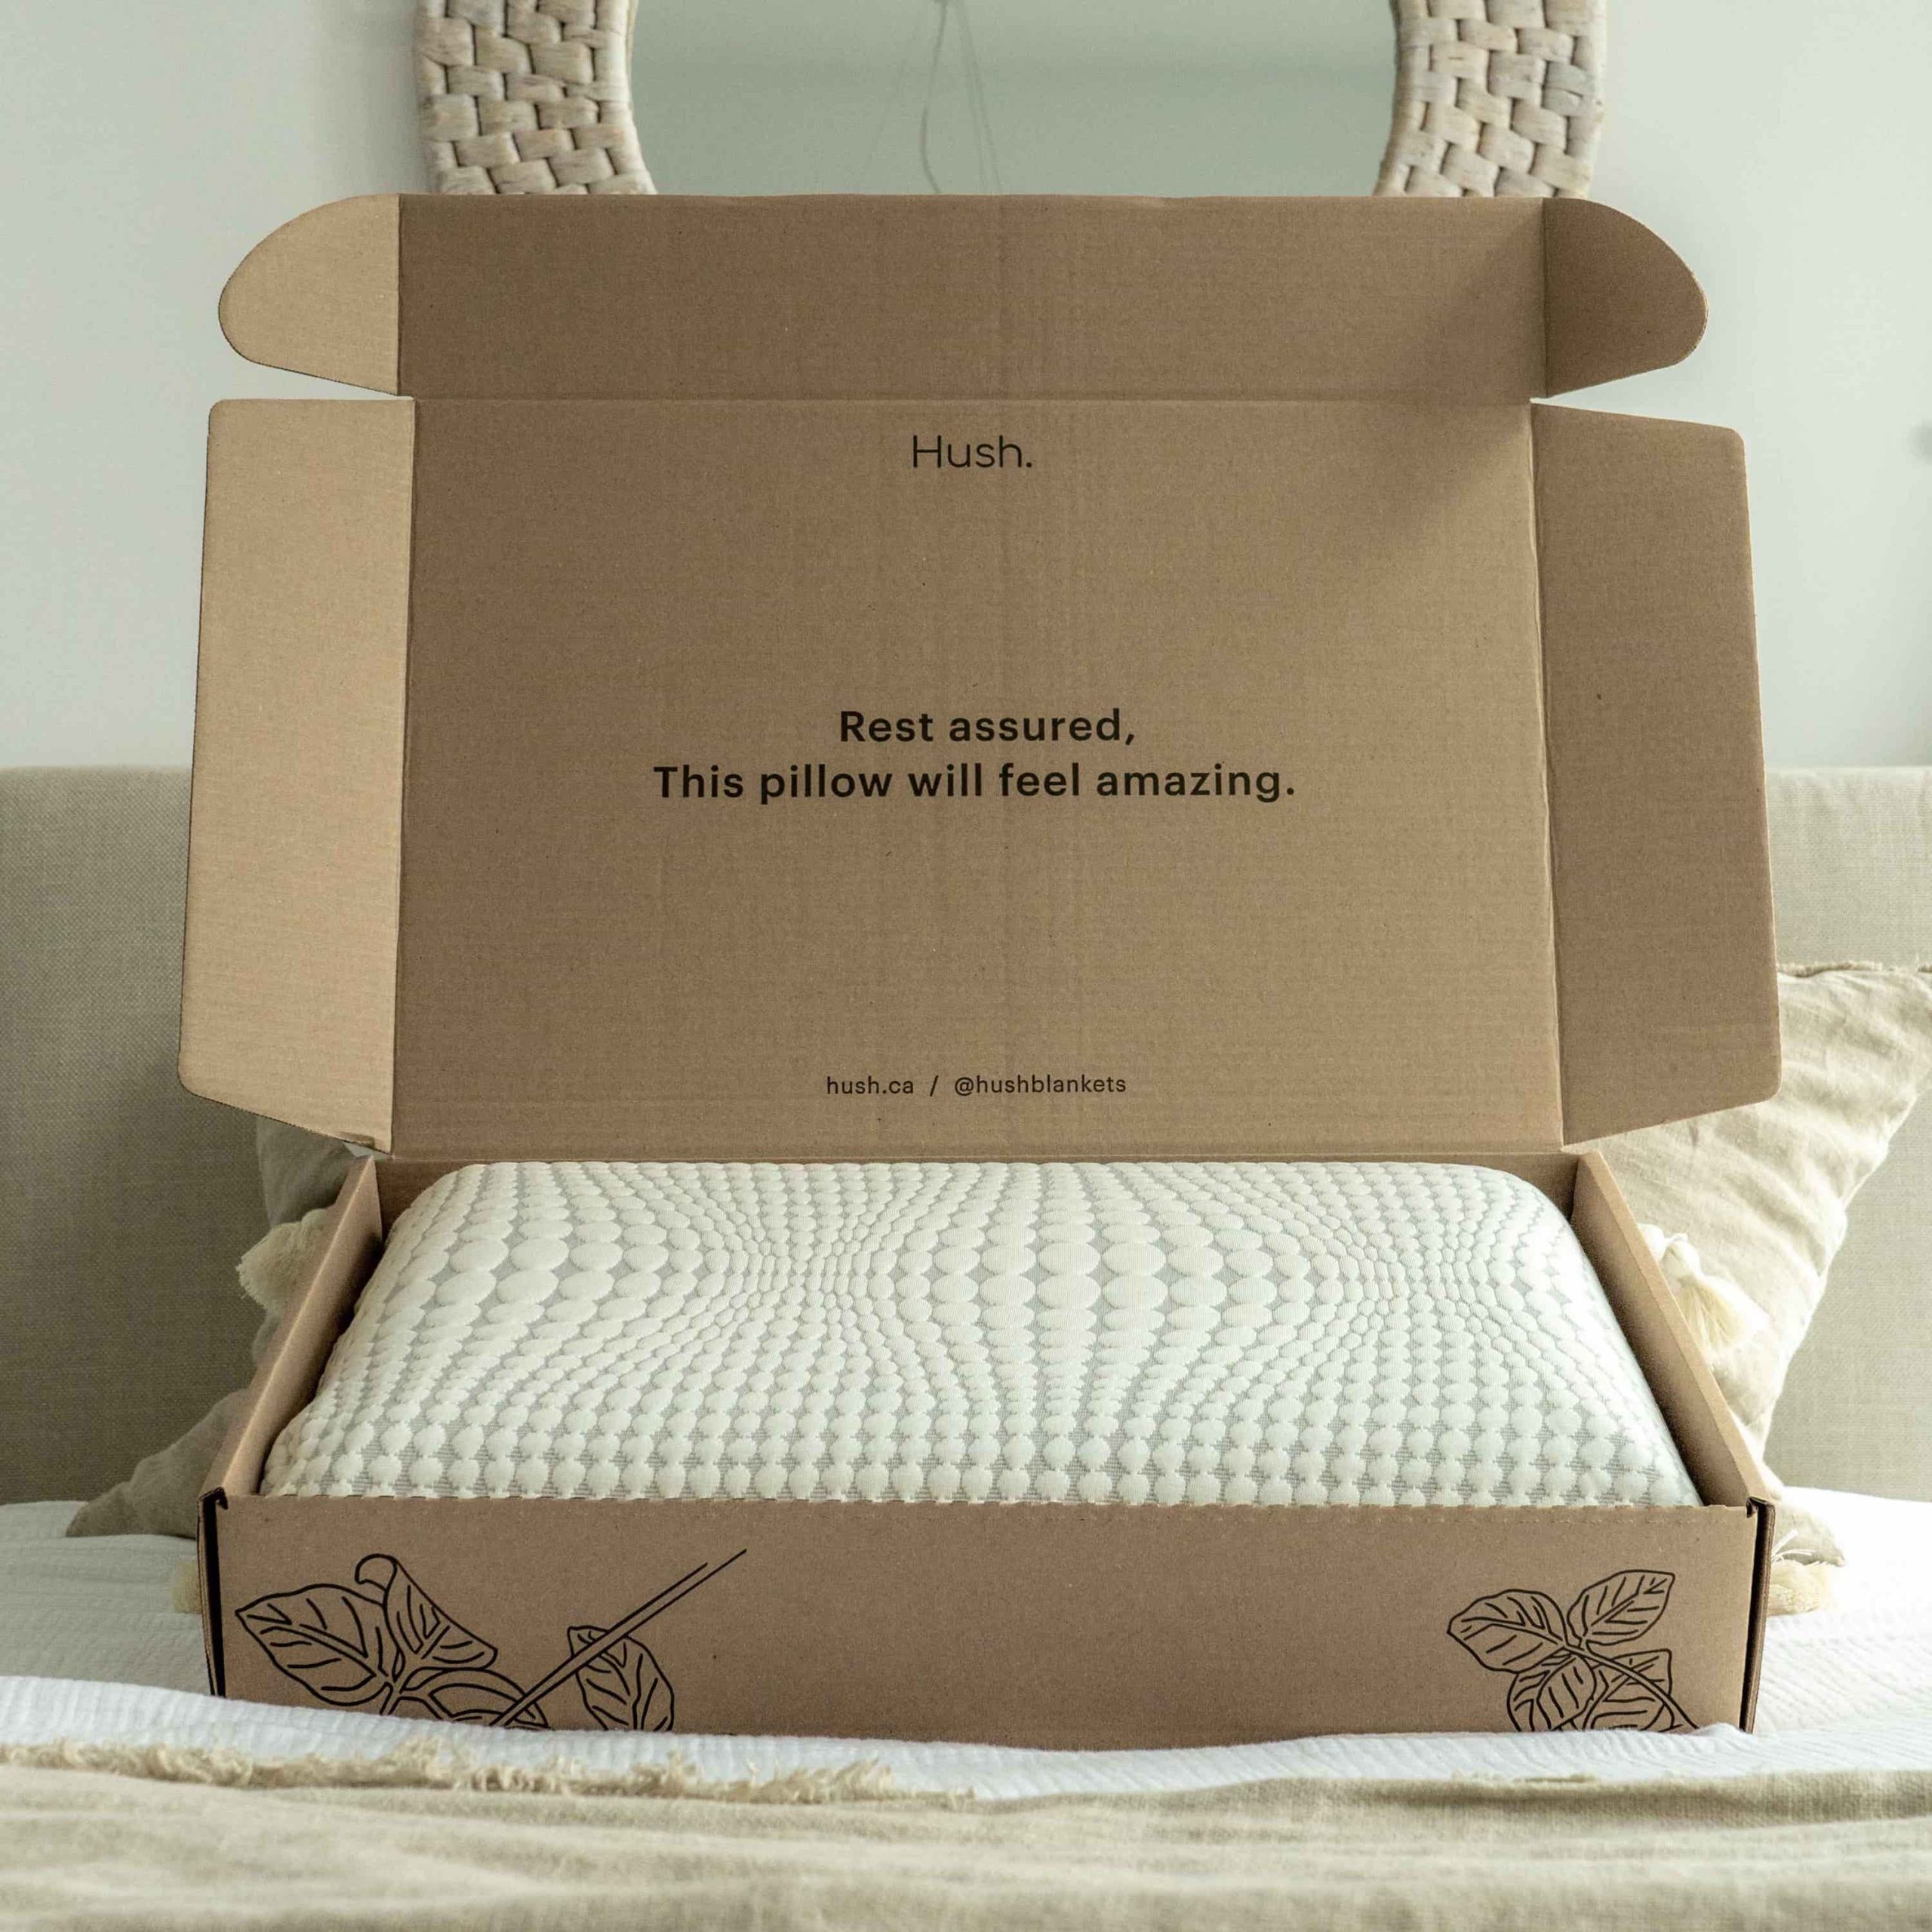 HUSH Eco Pillow in Packaging